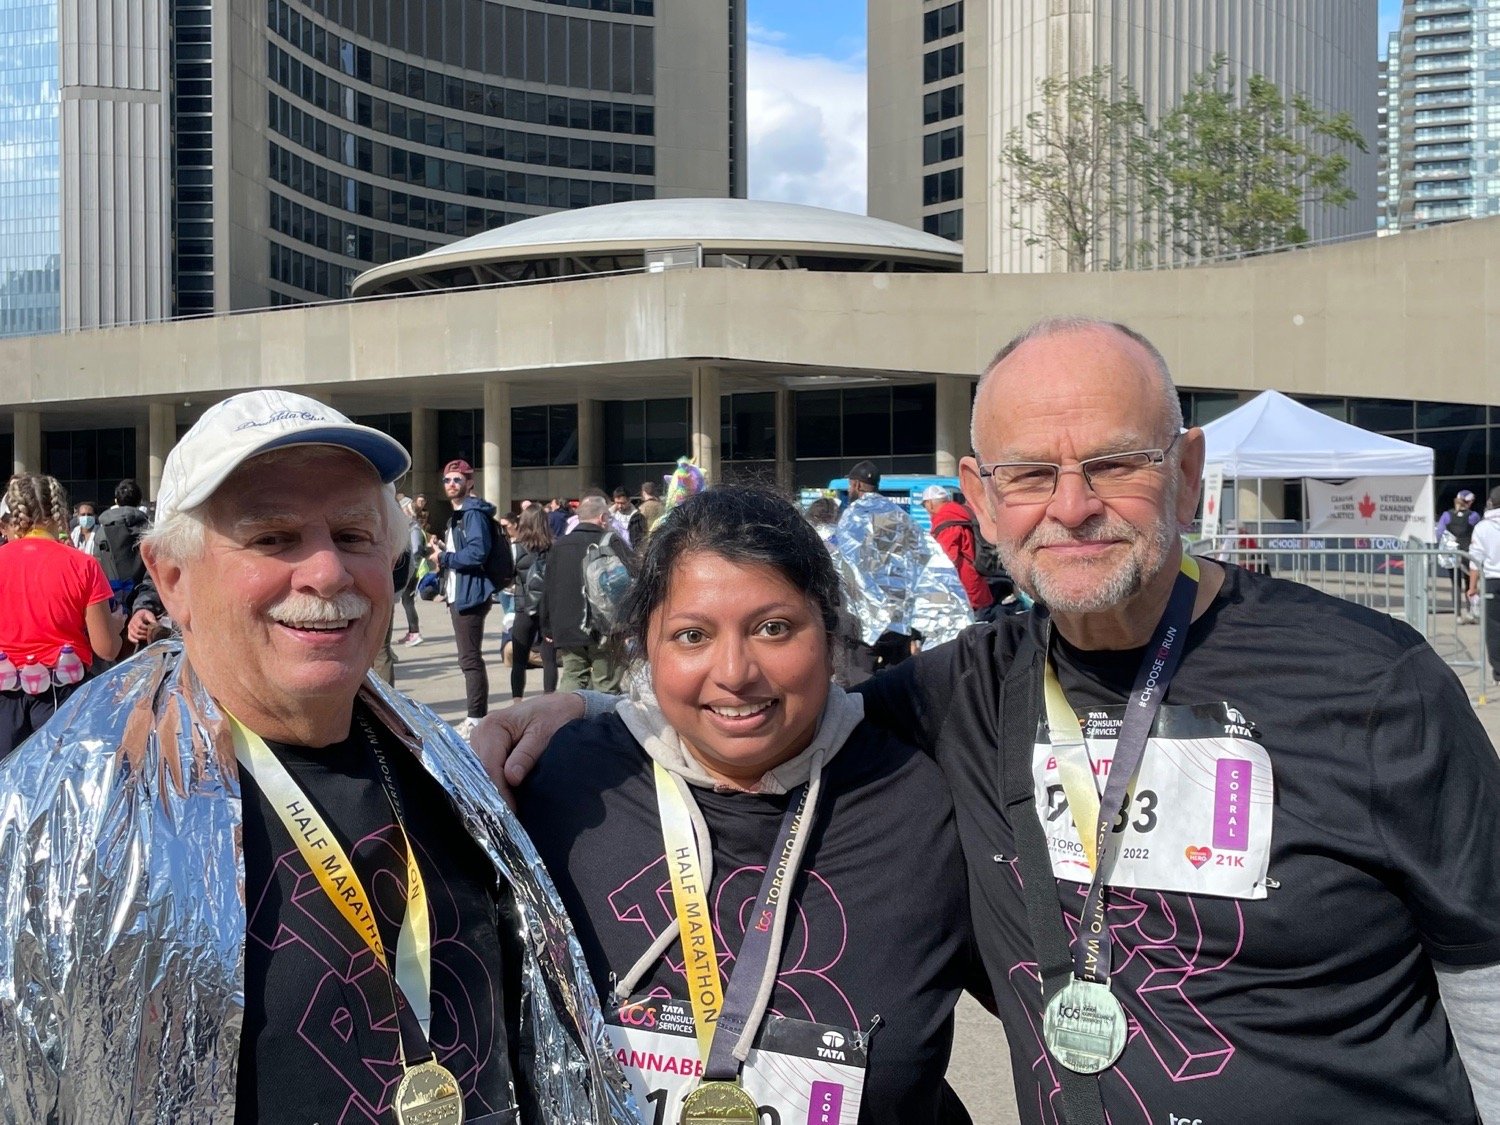 The Toronto Waterfront Marathon is a significant fundraiser for many charities in Toronto, including Rainbow Faith and Freedom. We&rsquo;ve been approved now for over 2 years as one of the official charities. The organizer of the event does all the w